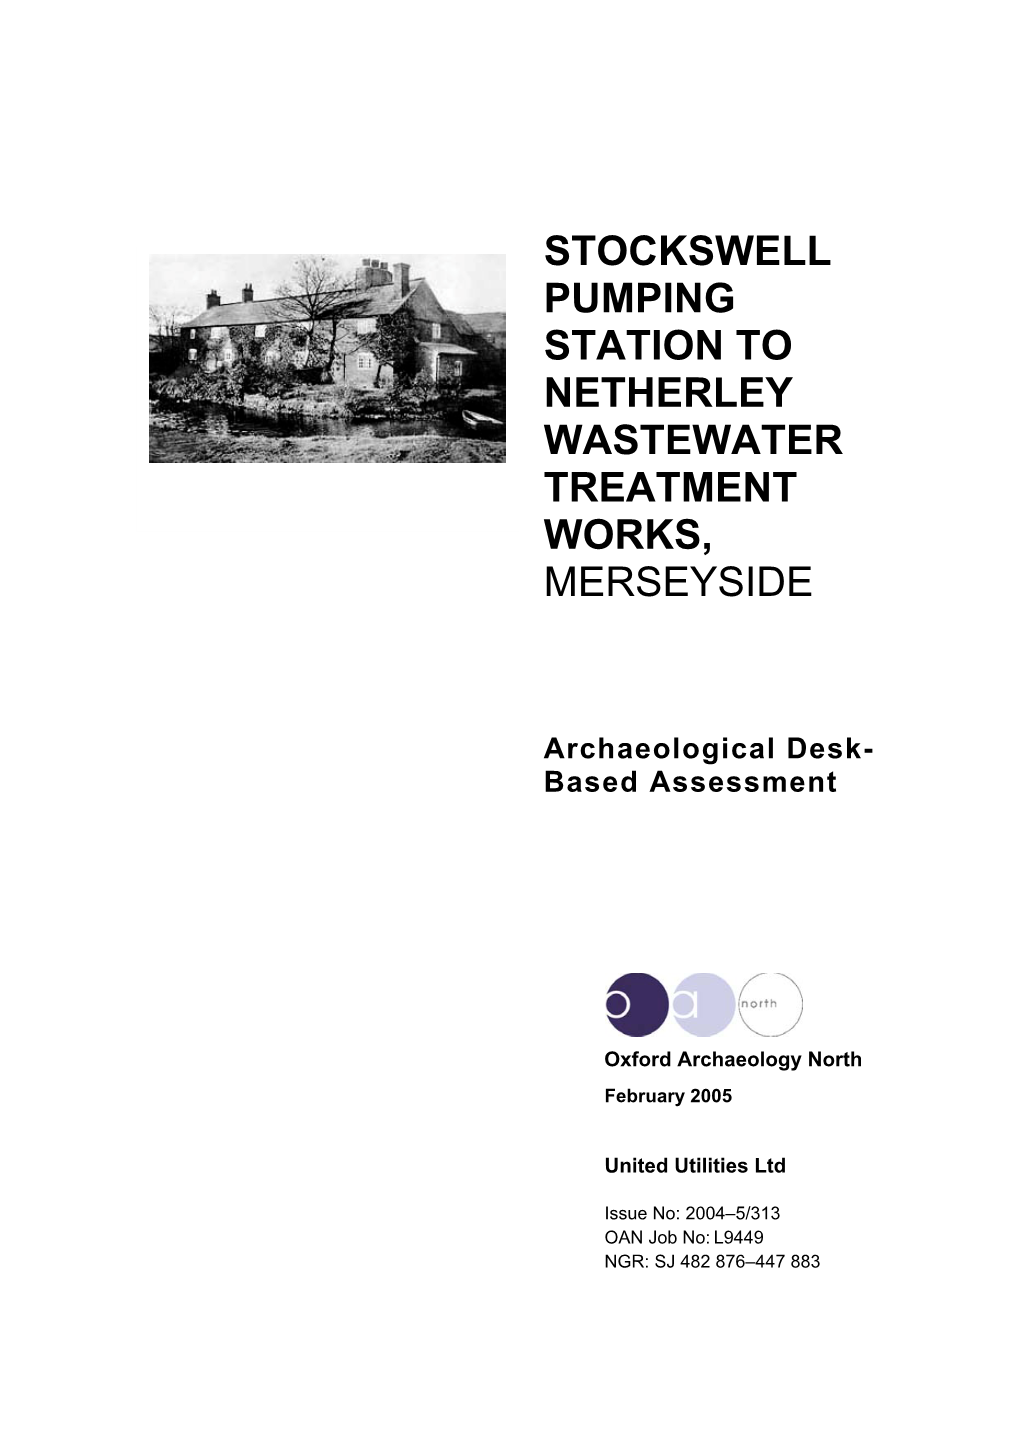 Stockswell Pumping Station to Netherley Wastewater Treatment Works, Merseyside